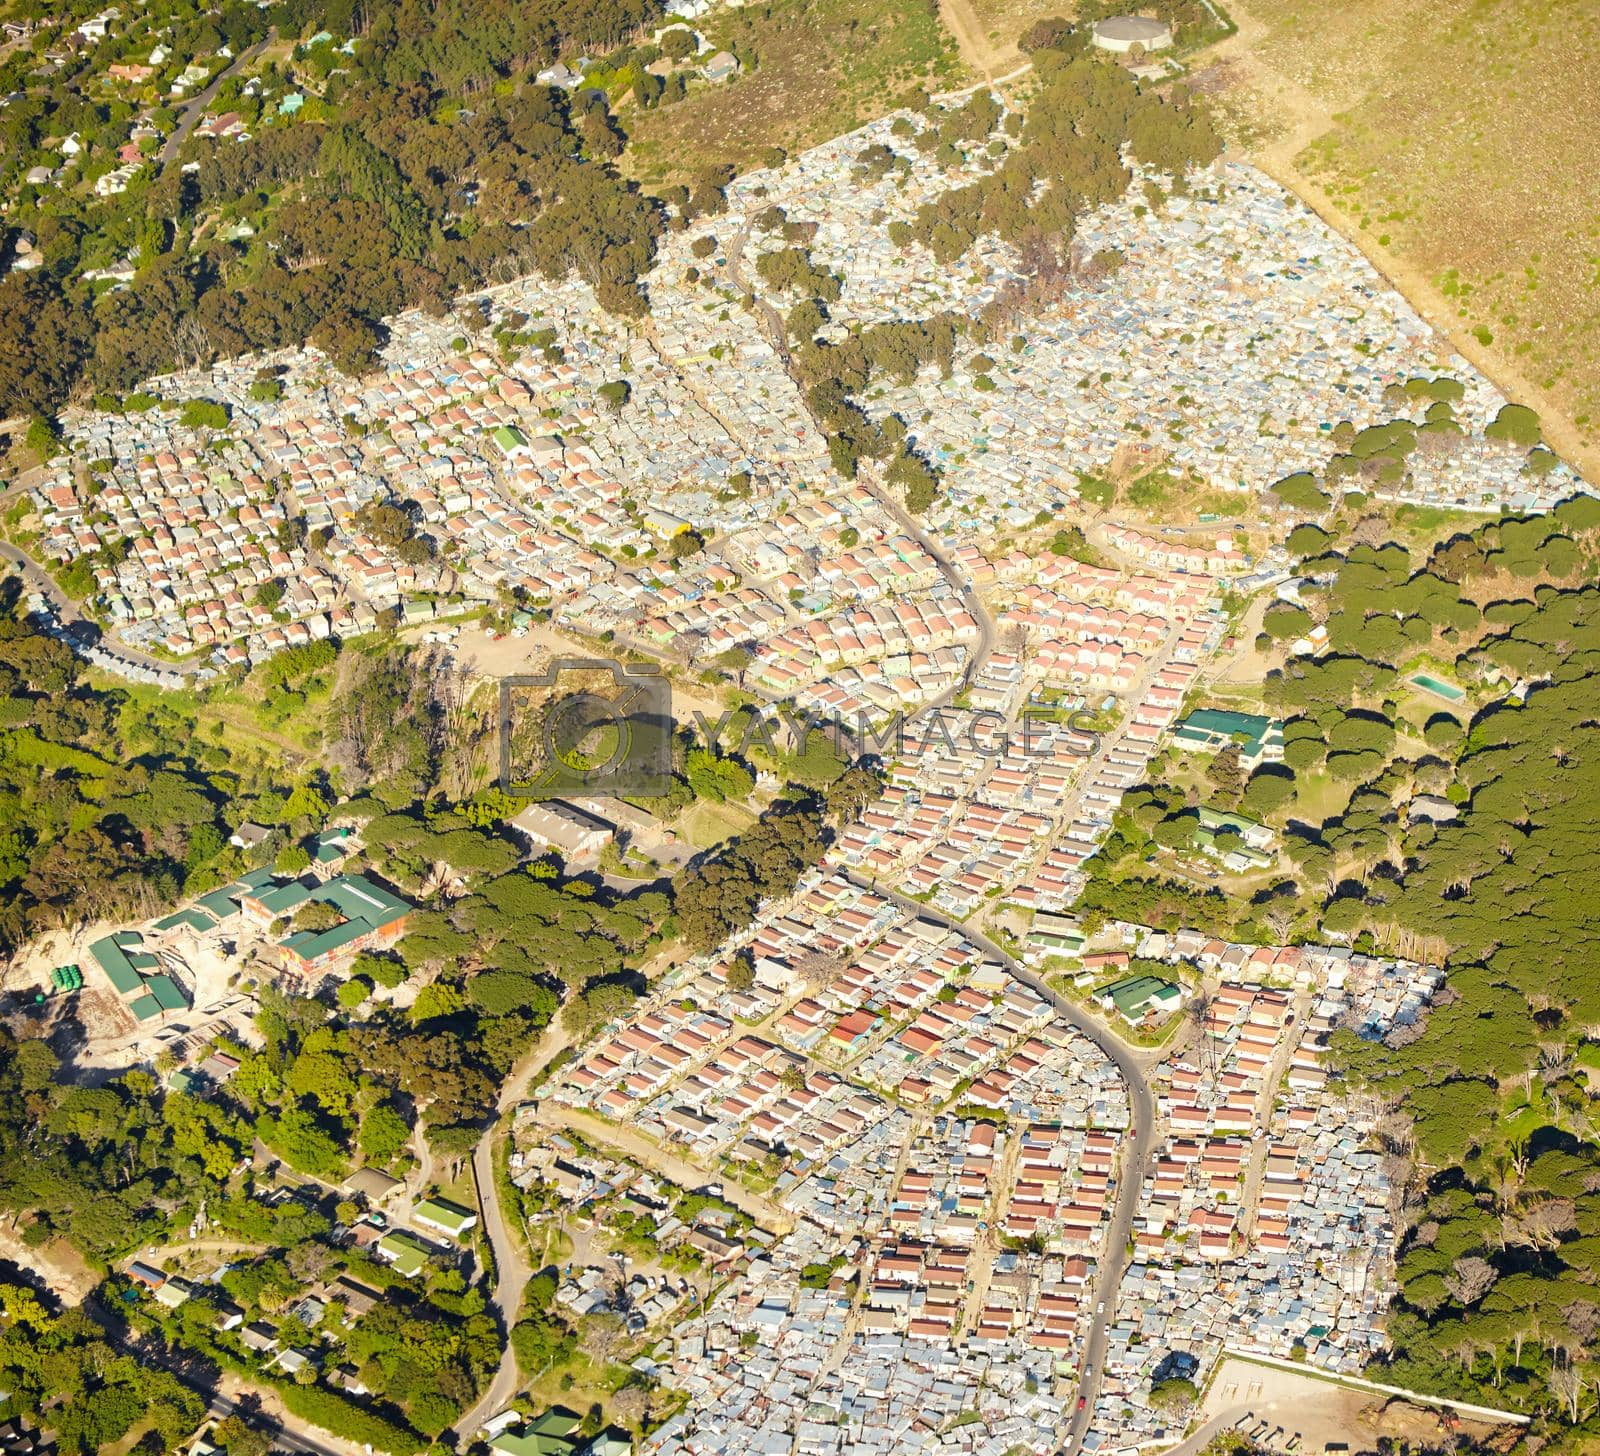 Rural development. Aerial view of a small urband development in the countryside